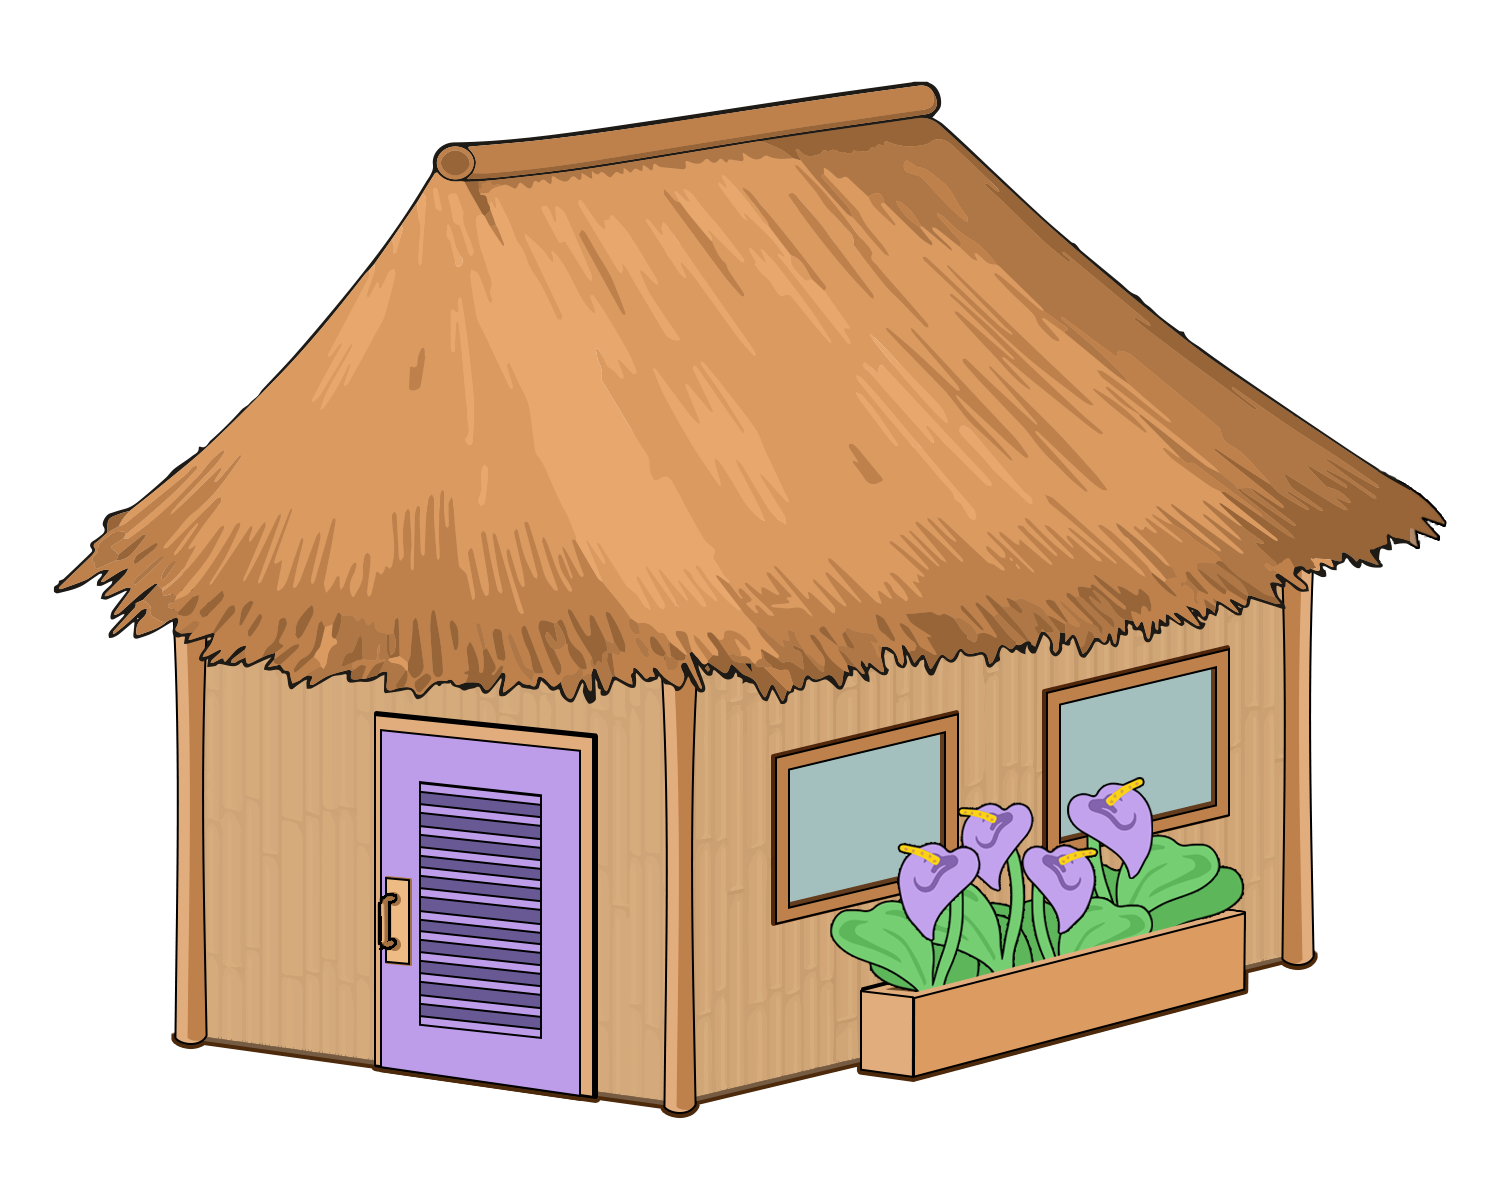 A tropical hut with a grass roof